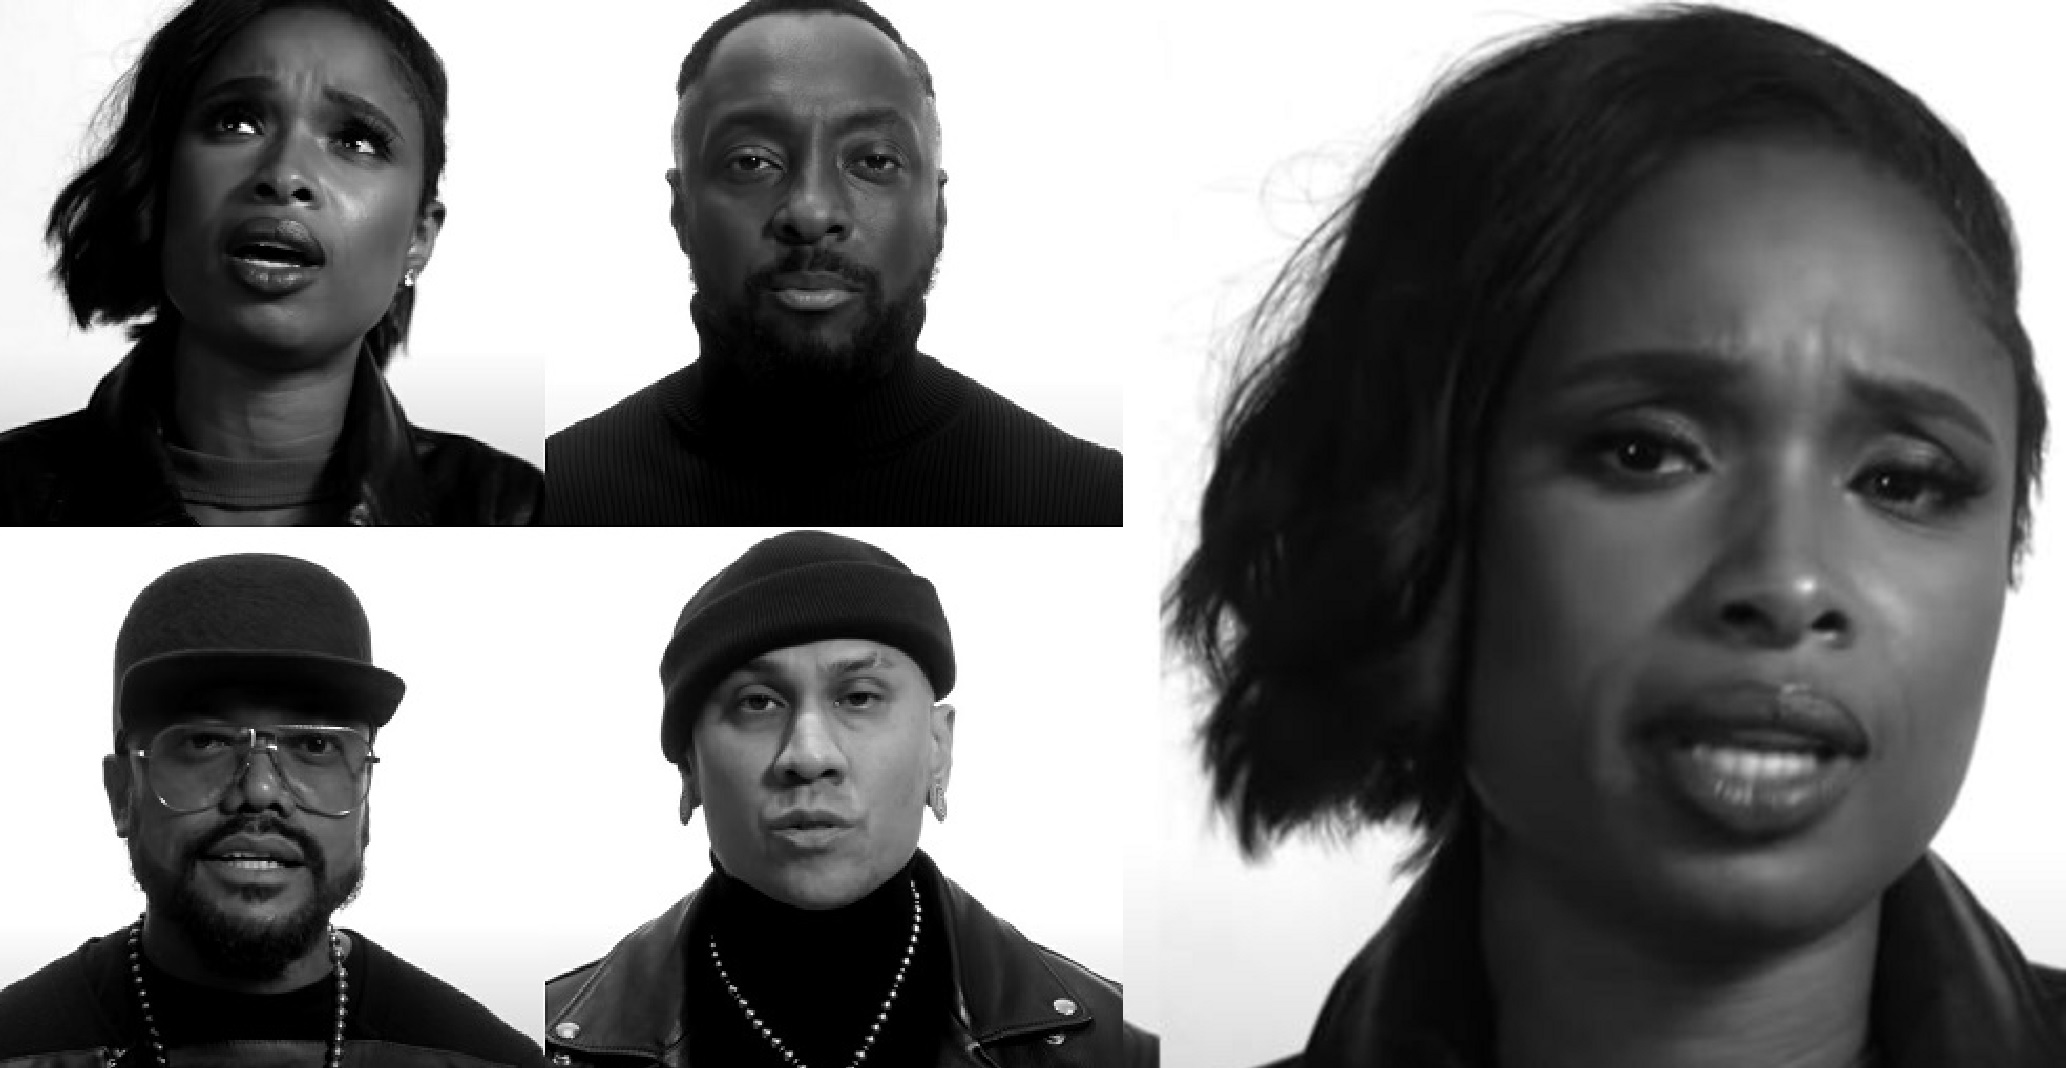 Jennifer Hudson and Black Eyed Peas Come Together For Sensational ‘The Love’ Collab For Election Campaign